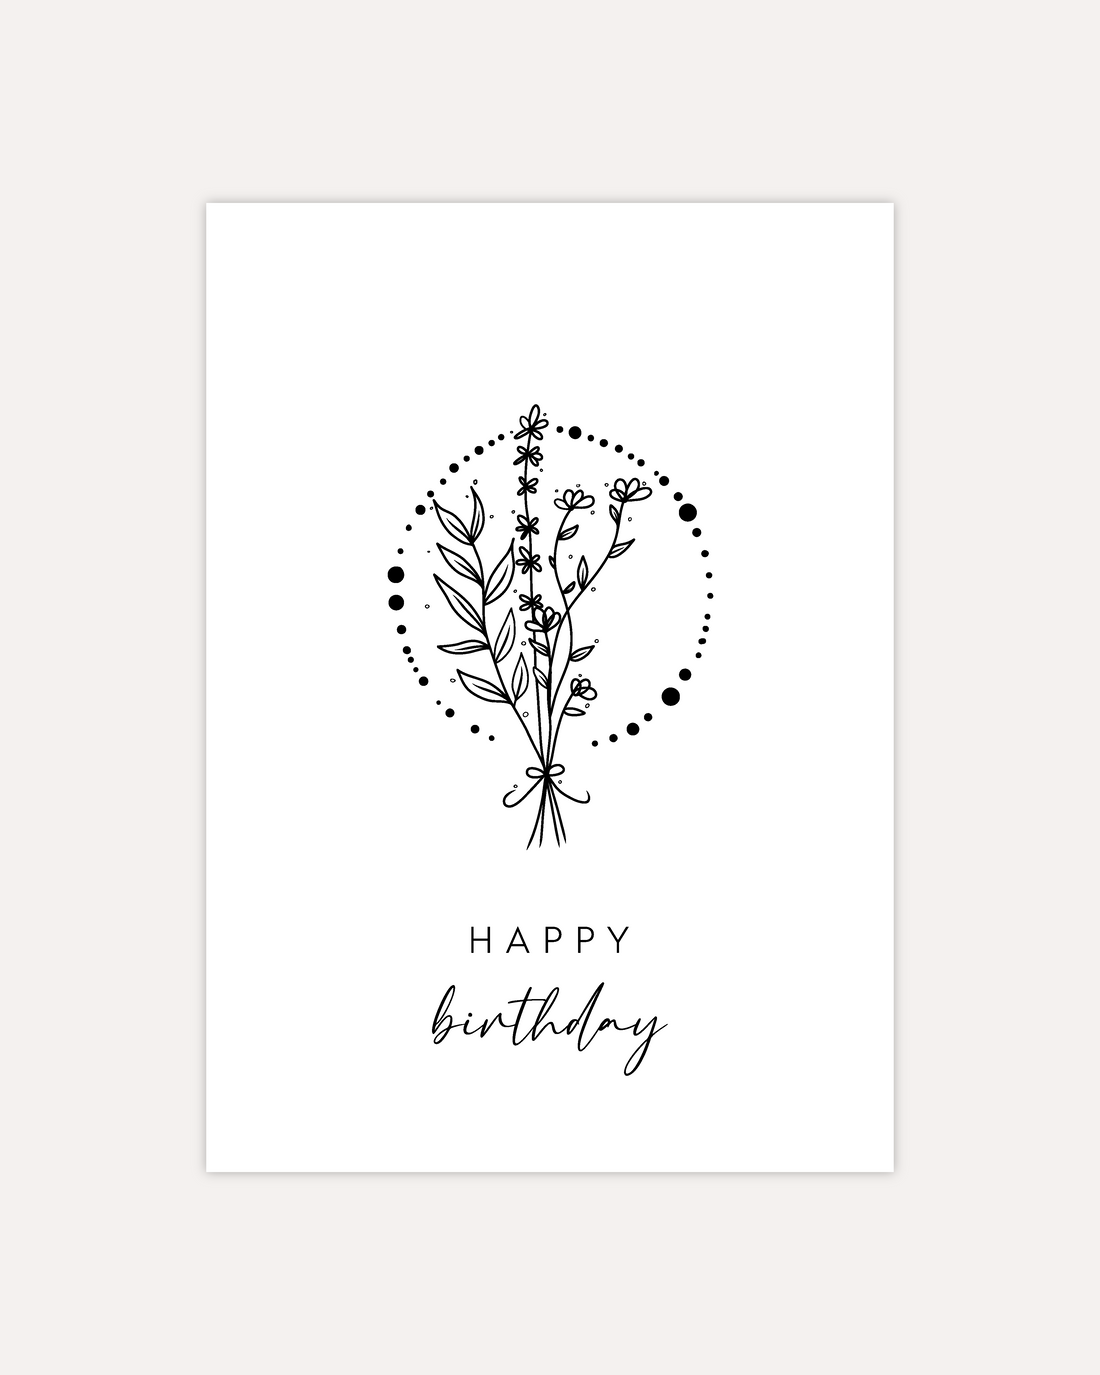 A postcard design showing a lineart drawing of some flowers and branches tied together, with a circle consisting of dots of varying sizes around them. Below that are two lines of text saying &quot;Happy Birthday&quot;. The design is shown on a beige background.